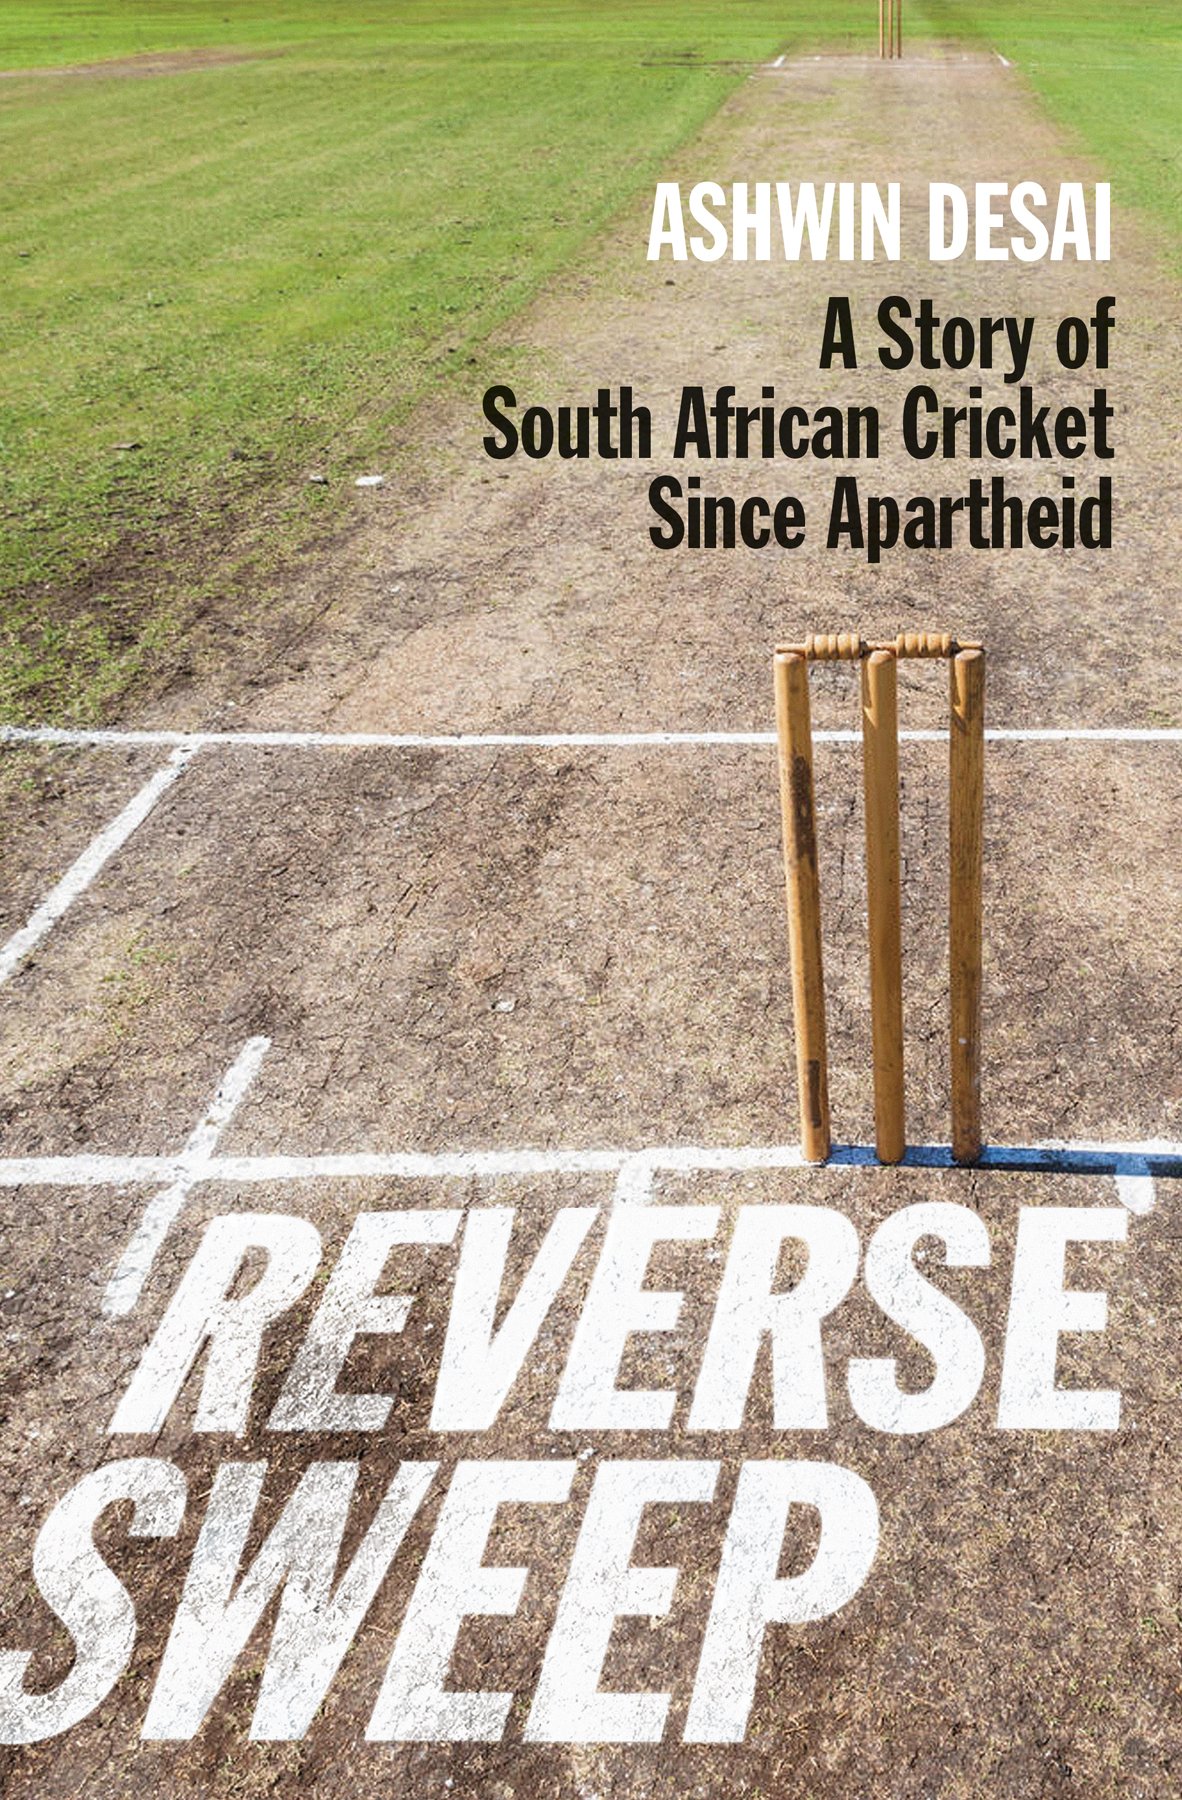 Reverse Sweep: A story of South African cricket since apartheid - Jacana